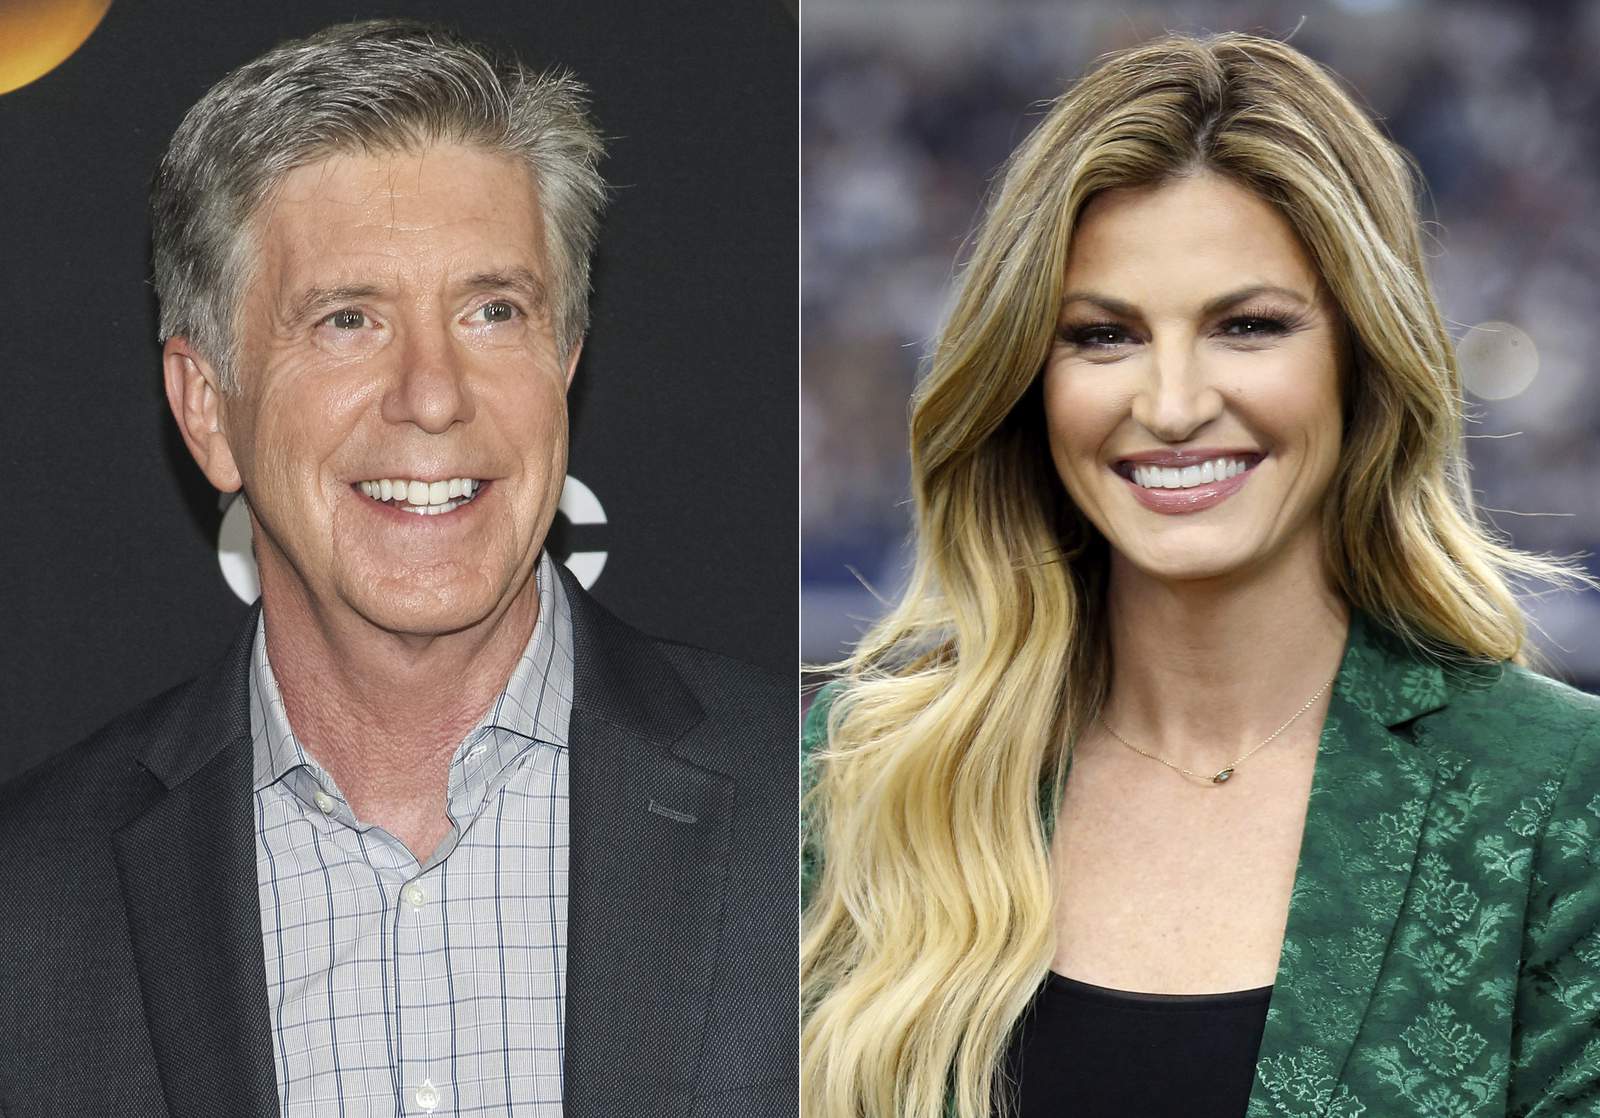 Tom Bergeron, Erin Andrews exit 'Dancing With the Stars'